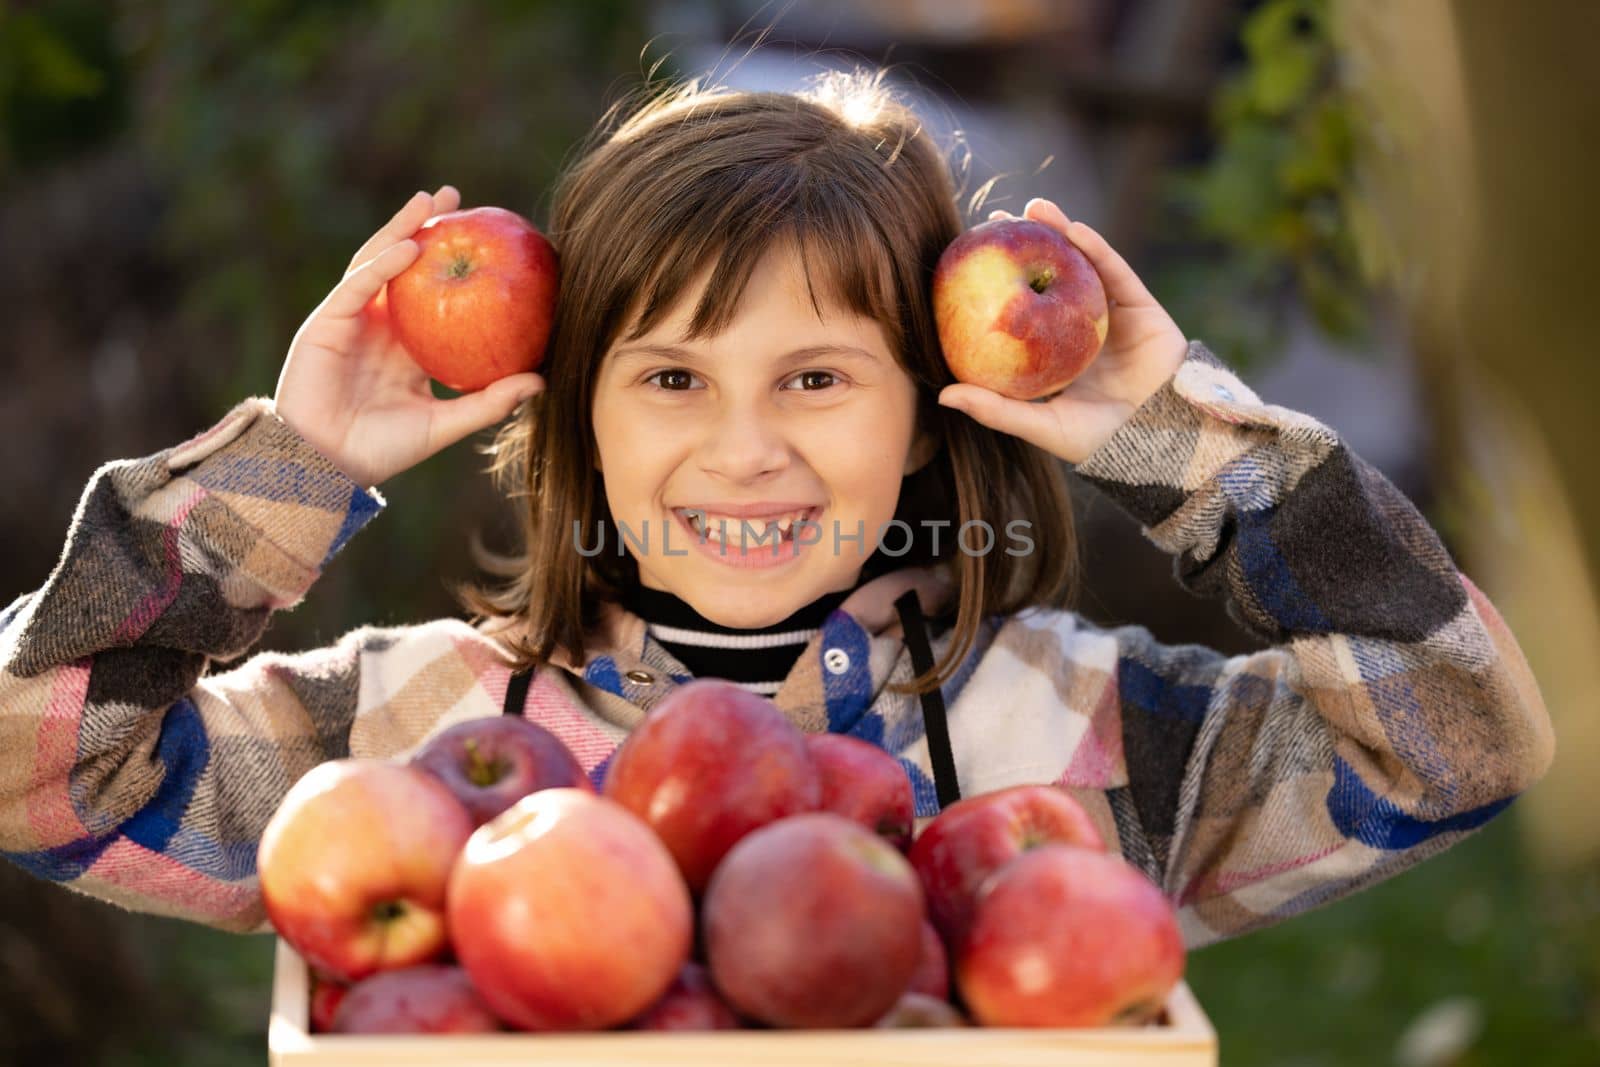 Beautiful smiling young child female girl holding apples with pretty face looking at camera. Organic red freshly picked apples in the wooden box. Apple harvesting. Apple farming.